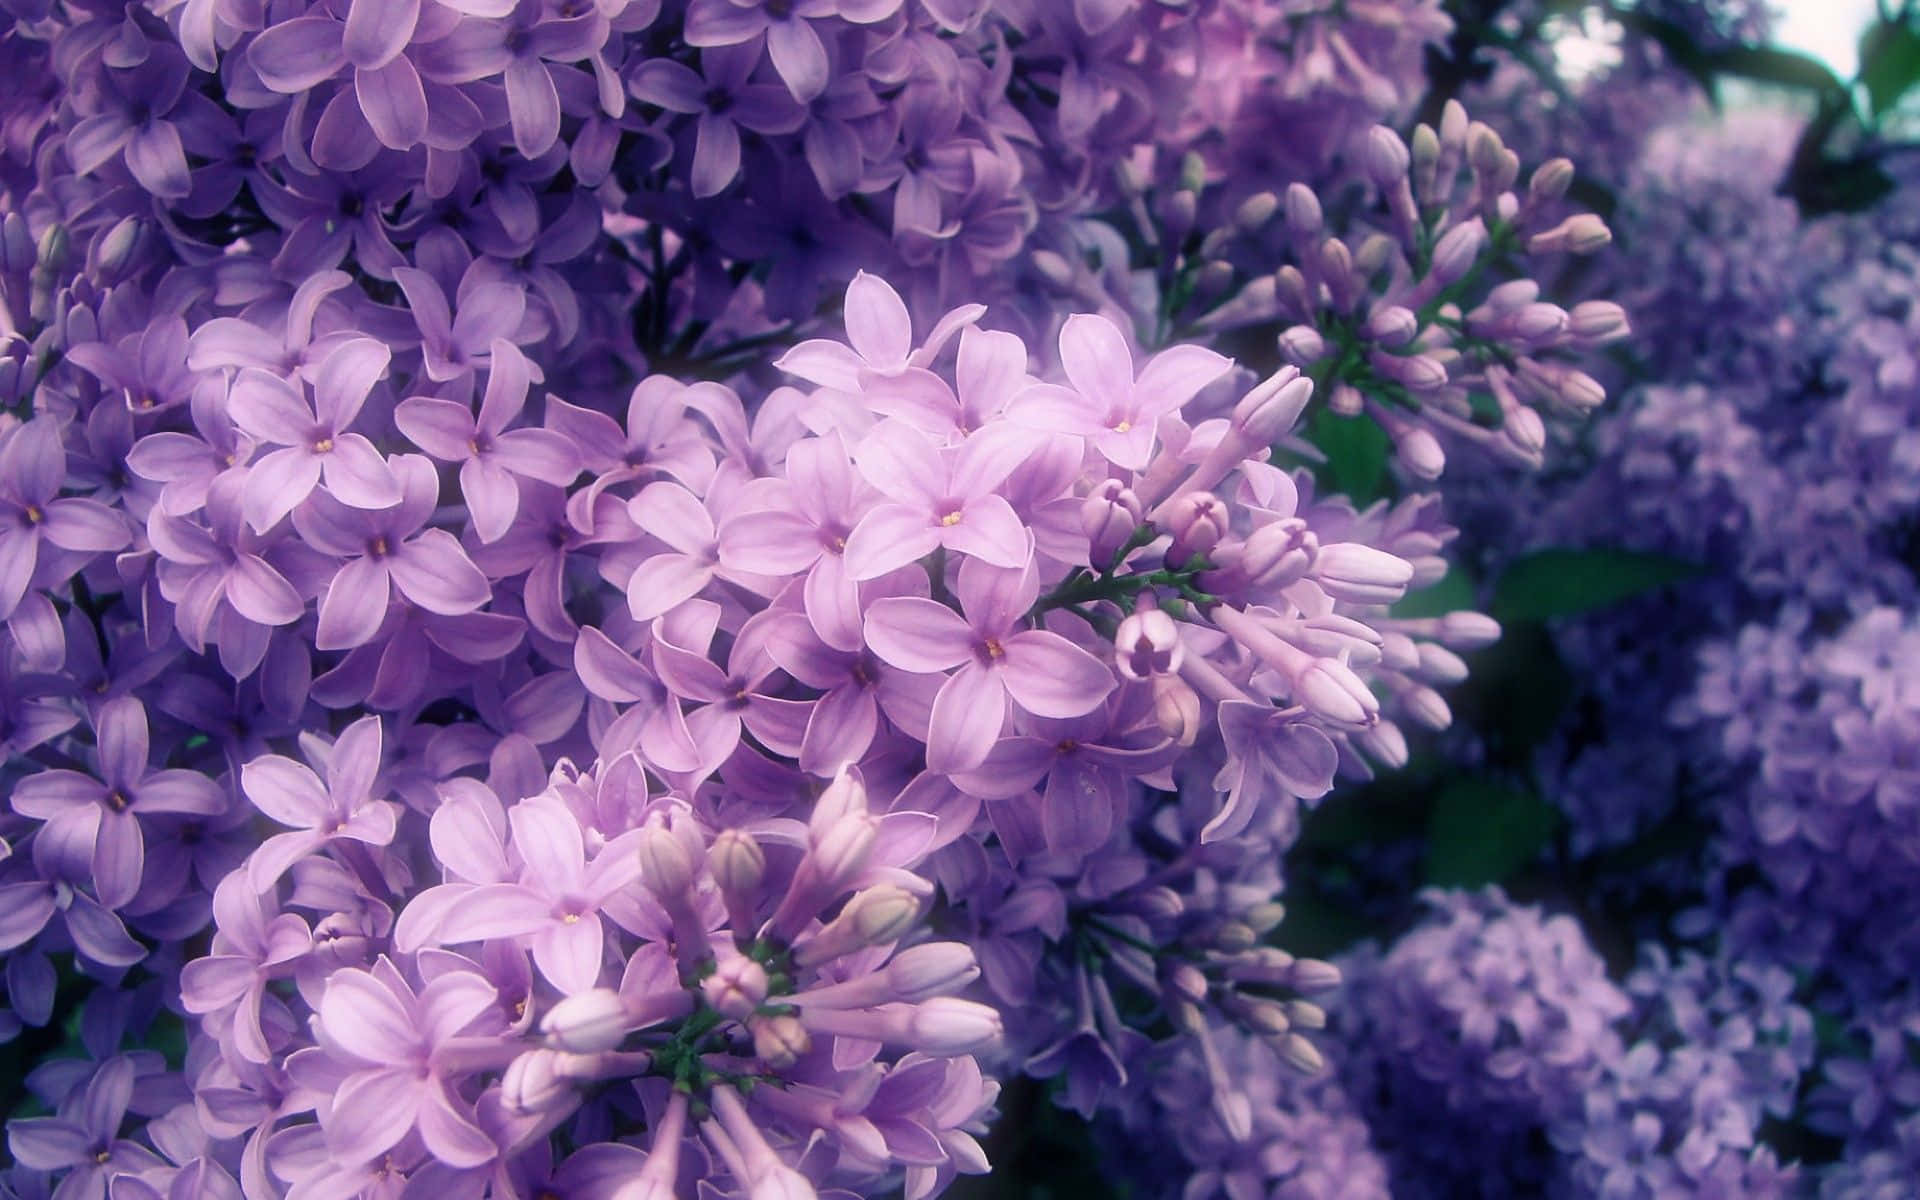 Blue Flowers Close Up Aesthetic Wallpaper